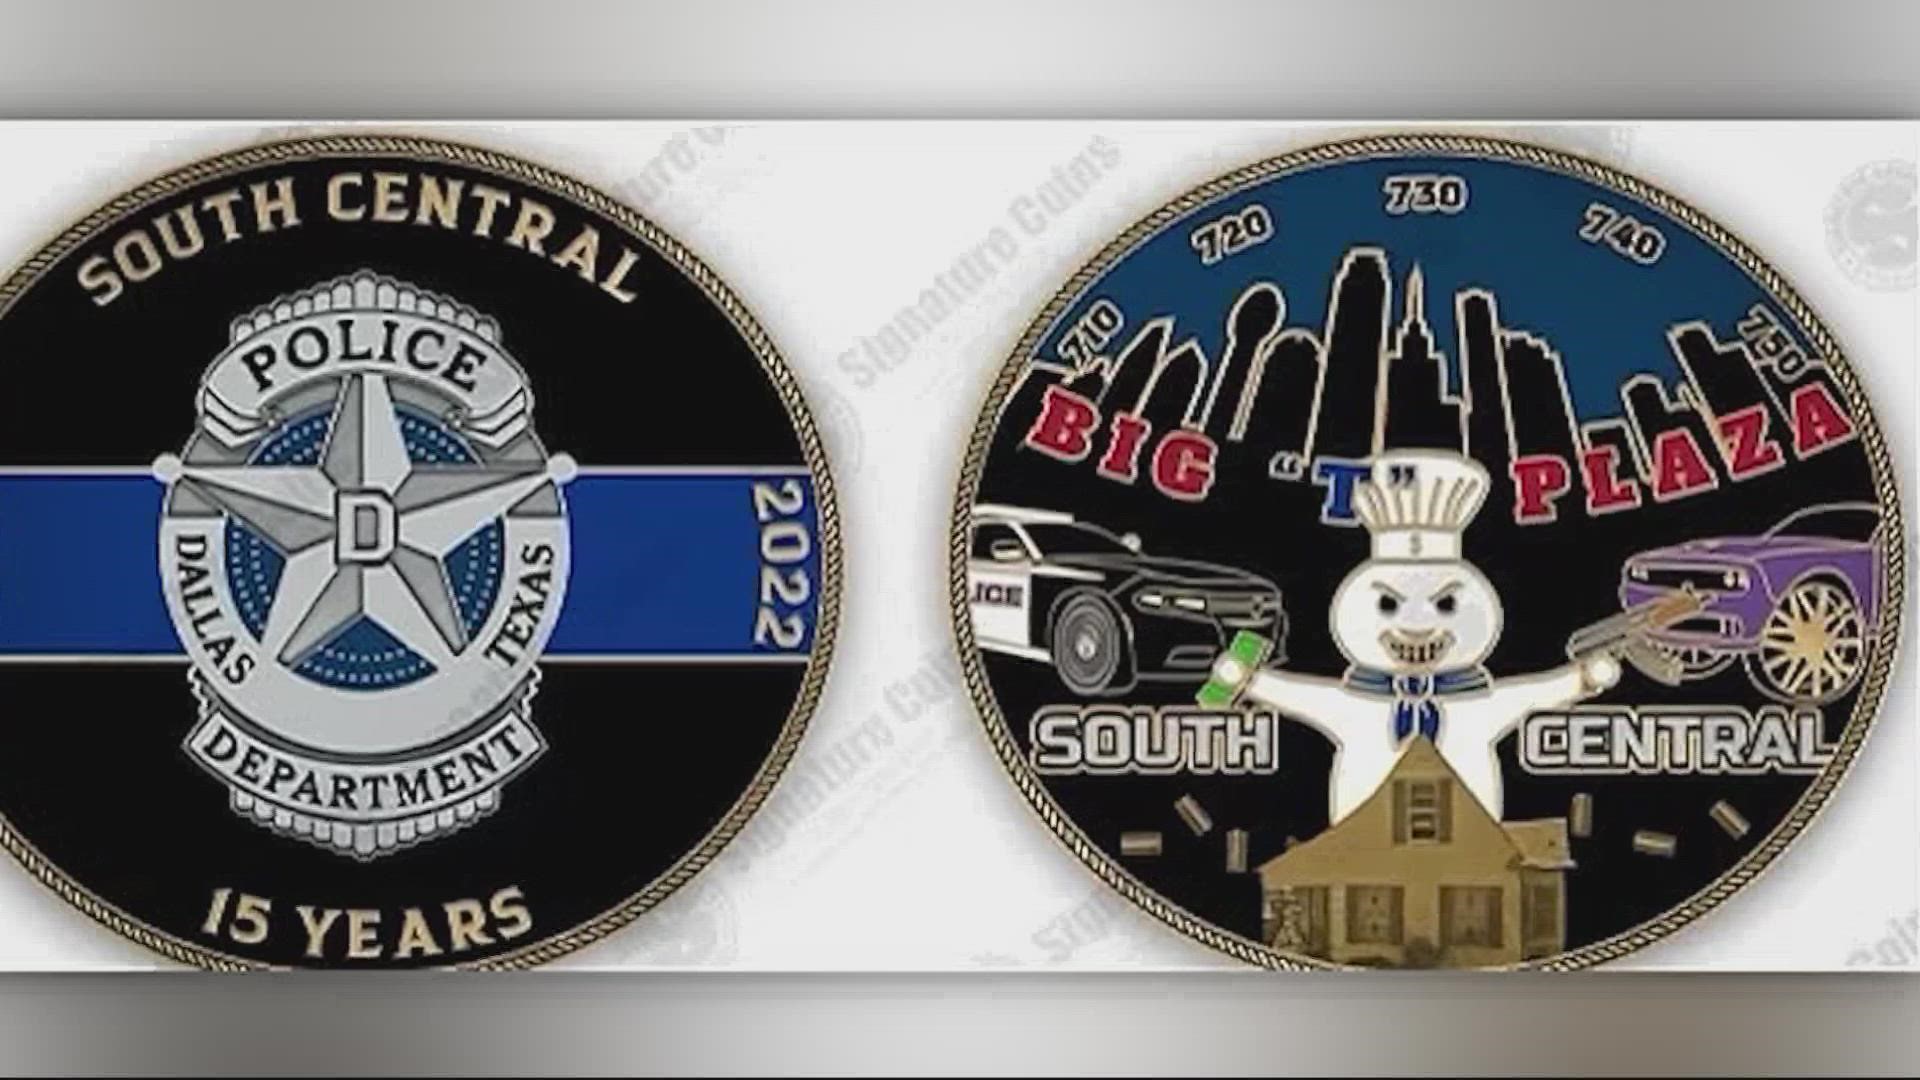 Dallas Police Chief Eddie Garcia and union officials decried a racist "challenge" coin an officer created that negatively depicted a southern Dallas neighborhood.